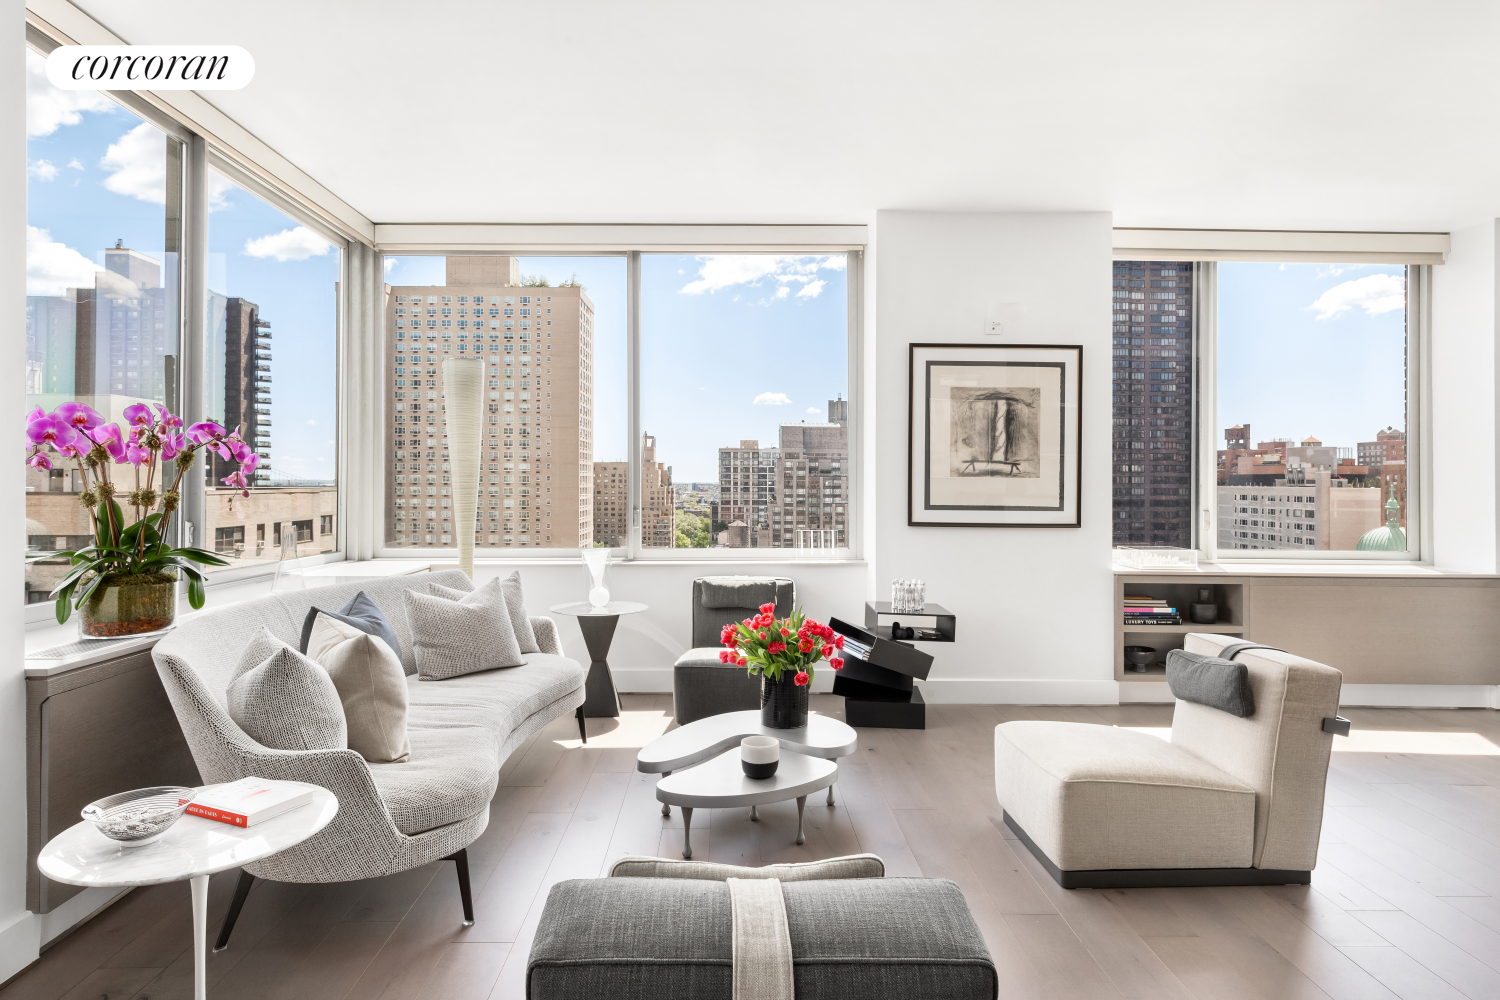 360 East 88th Street 15C, Yorkville, Upper East Side, NYC - 4 Bedrooms  
3.5 Bathrooms  
7 Rooms - 